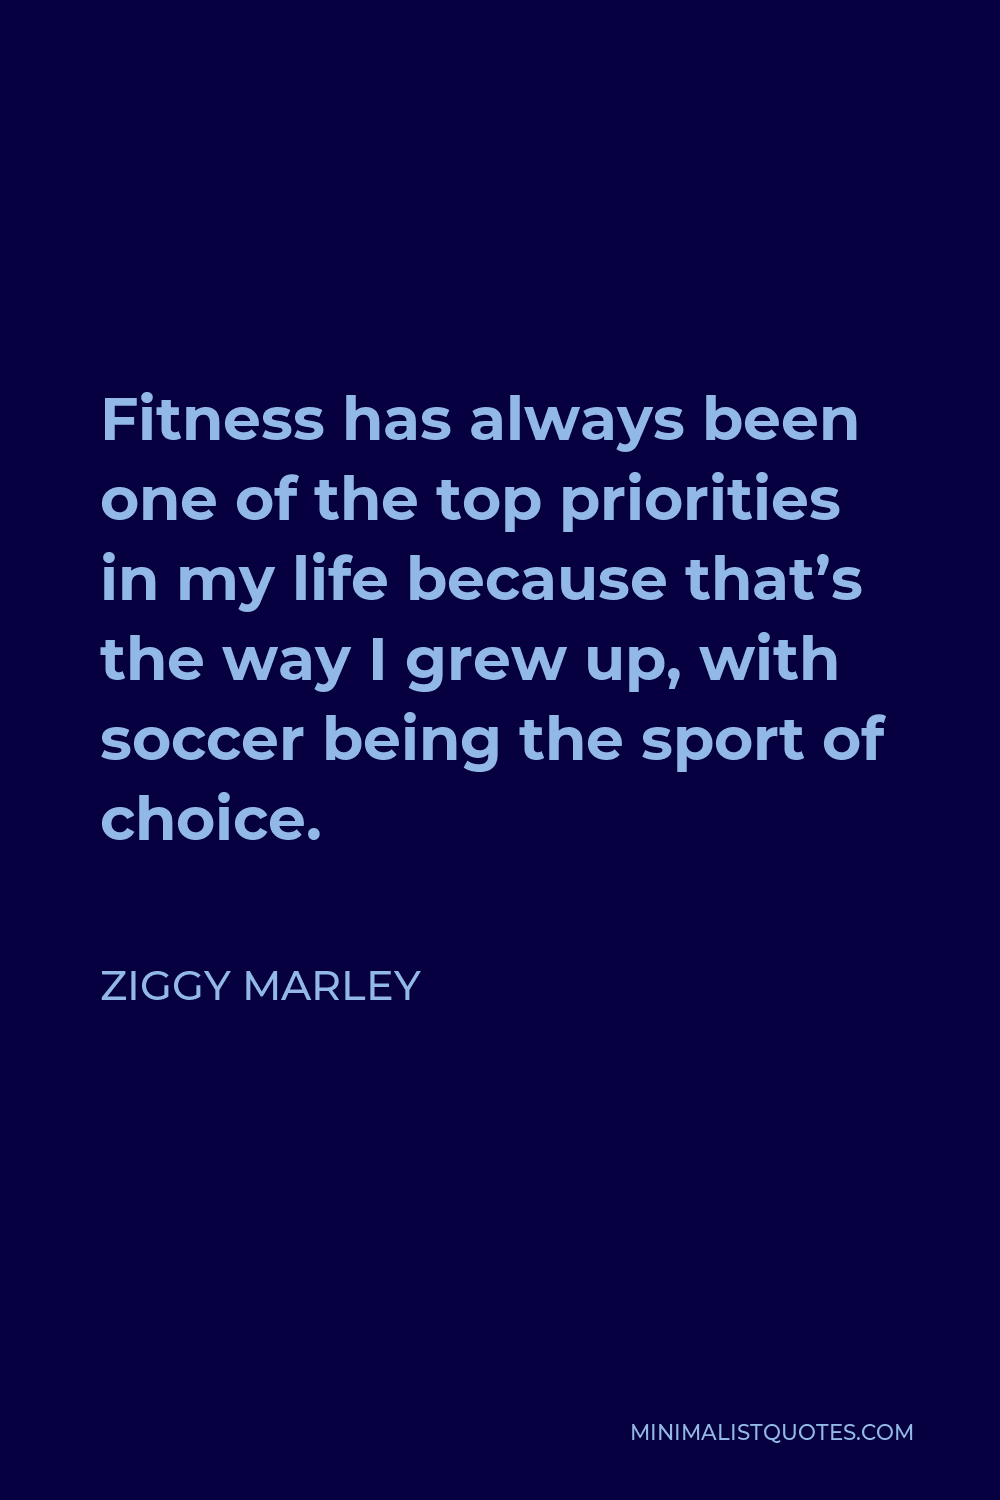 Ziggy Marley Quote - Fitness has always been one of the top priorities in my life because that’s the way I grew up, with soccer being the sport of choice.